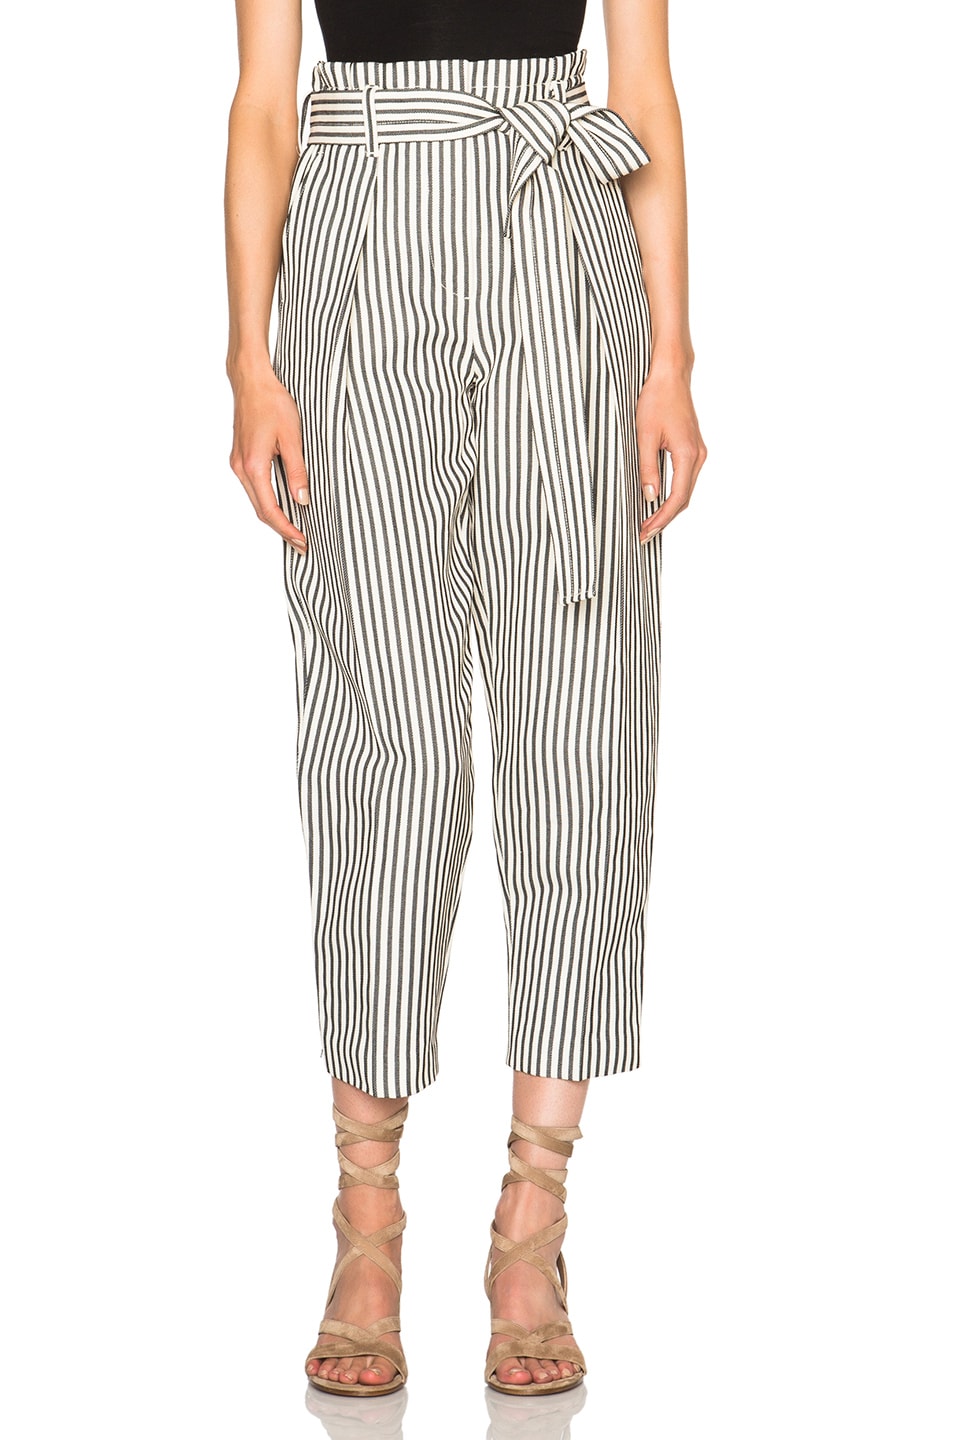 Image 1 of 3.1 phillip lim Paper Bag Pant in Ivory & Navy